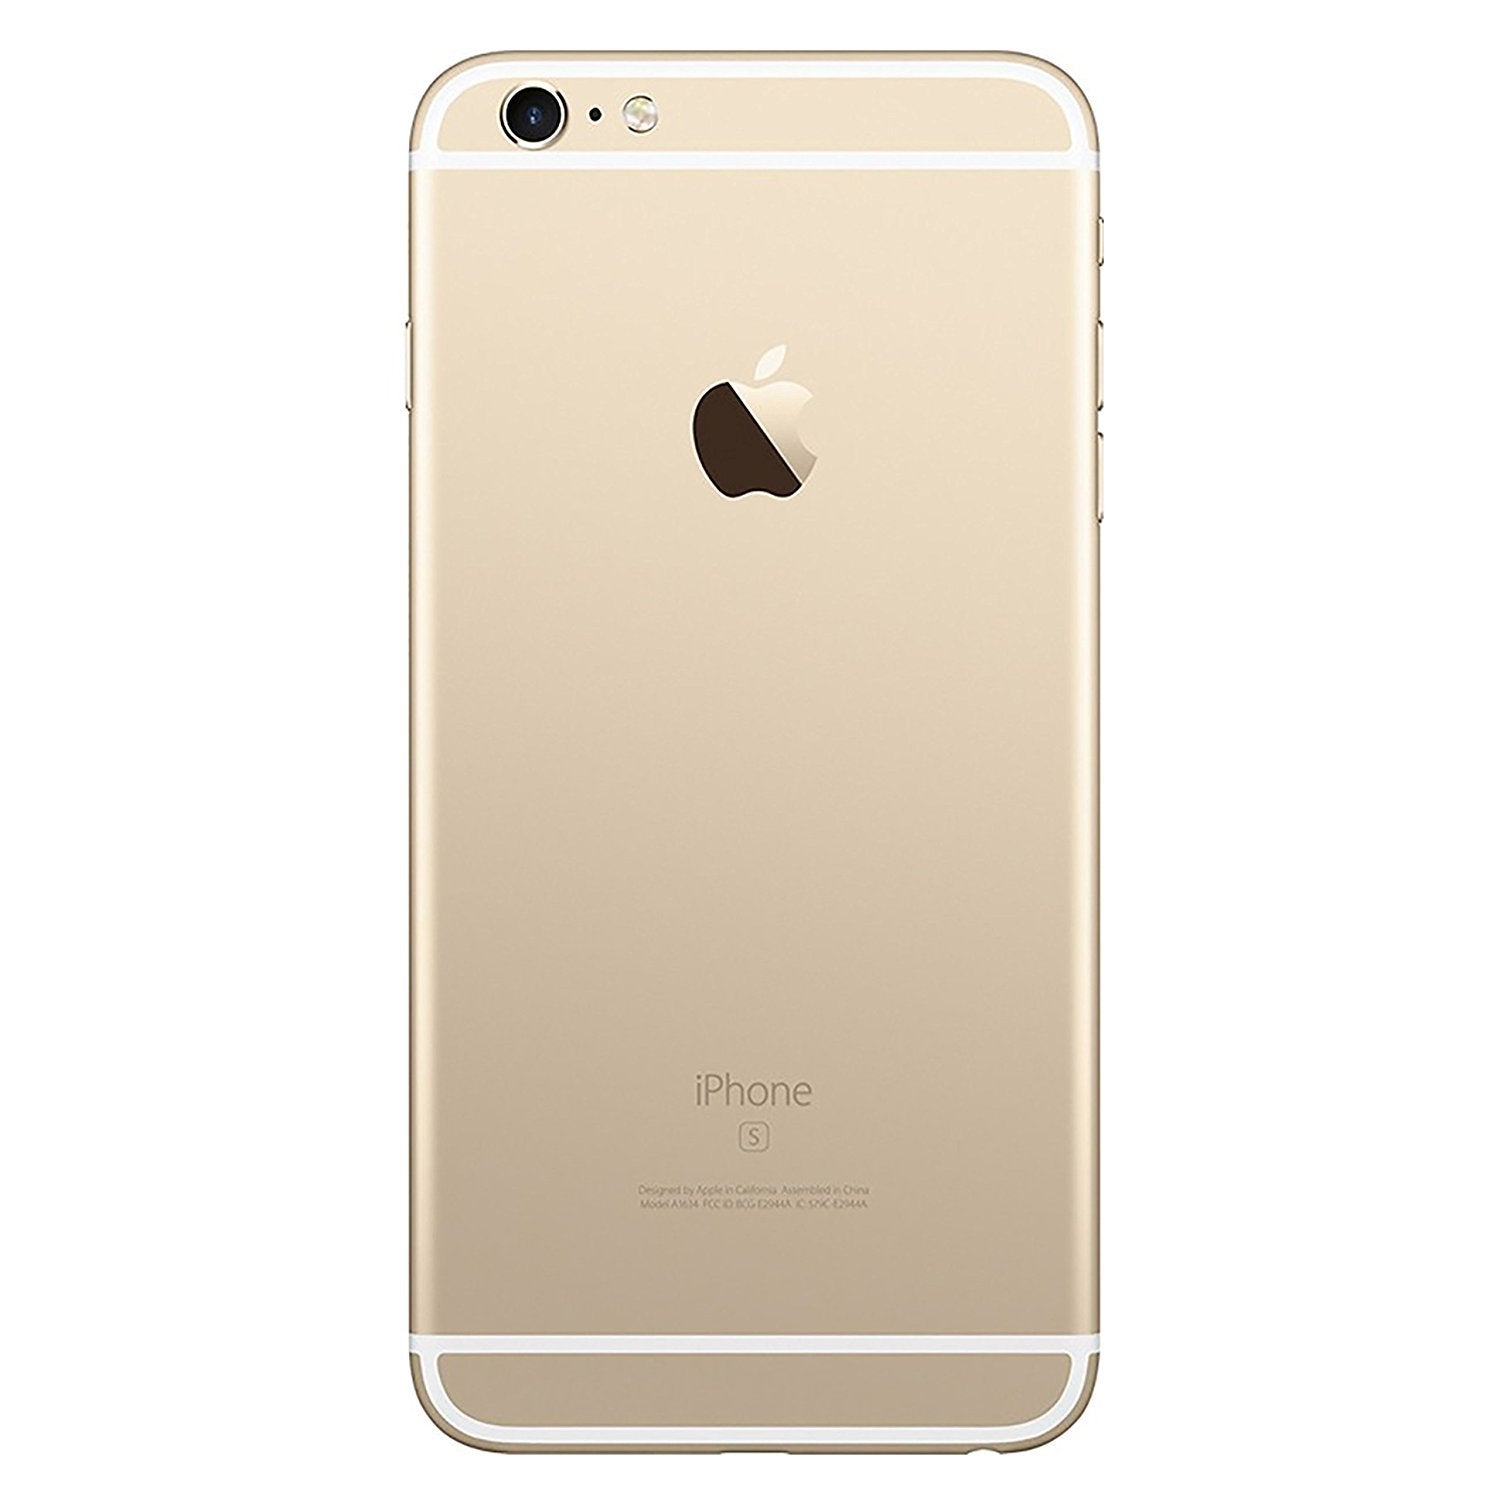 Apple iPhone 6s Plus Unlocked GSM 4G LTE Smartphone with 12MP Camera, 32 GB (Gold)